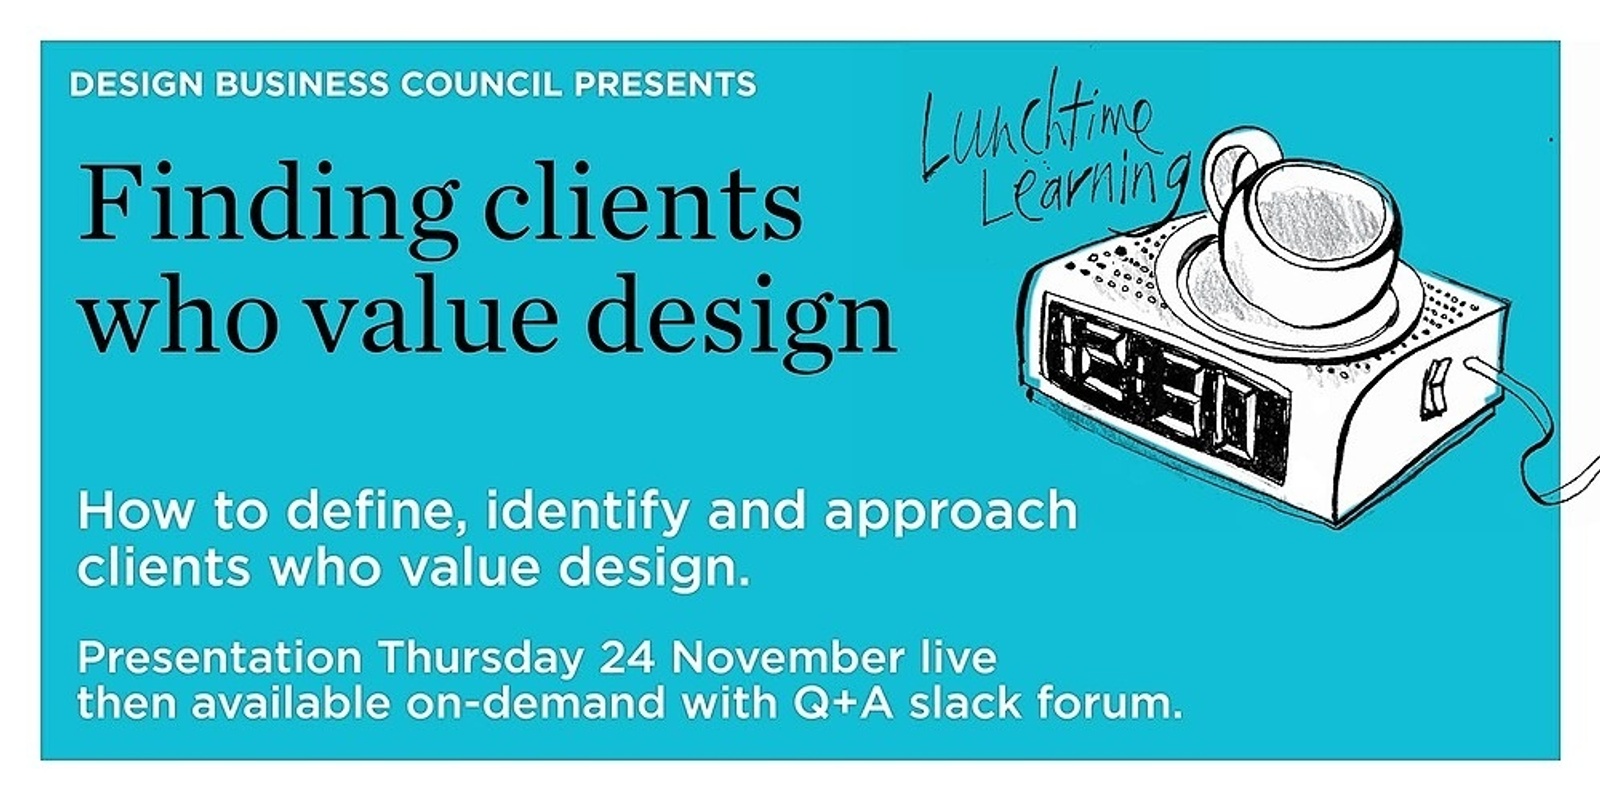 Banner image for Finding clients who value design: a Lunchtime learning event presented by DBC